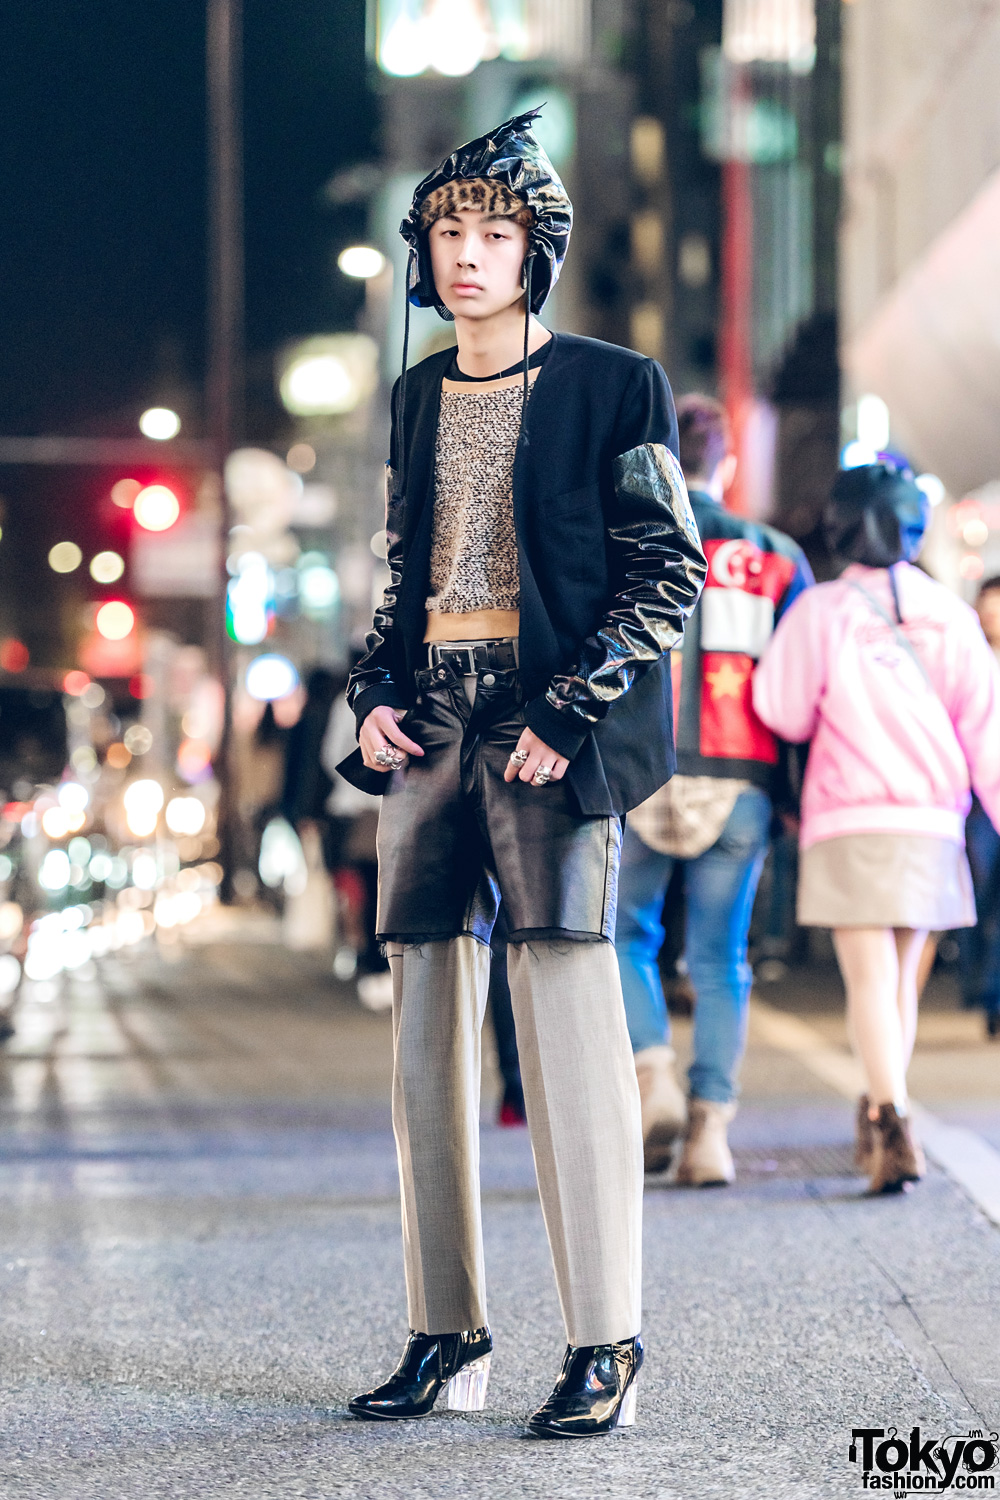 Harajuku Guy in Two-Tone Avant-Garde Street Style w/ Comme des Garcons Jacket & Tokyo Human Experiments Knuckle Rings